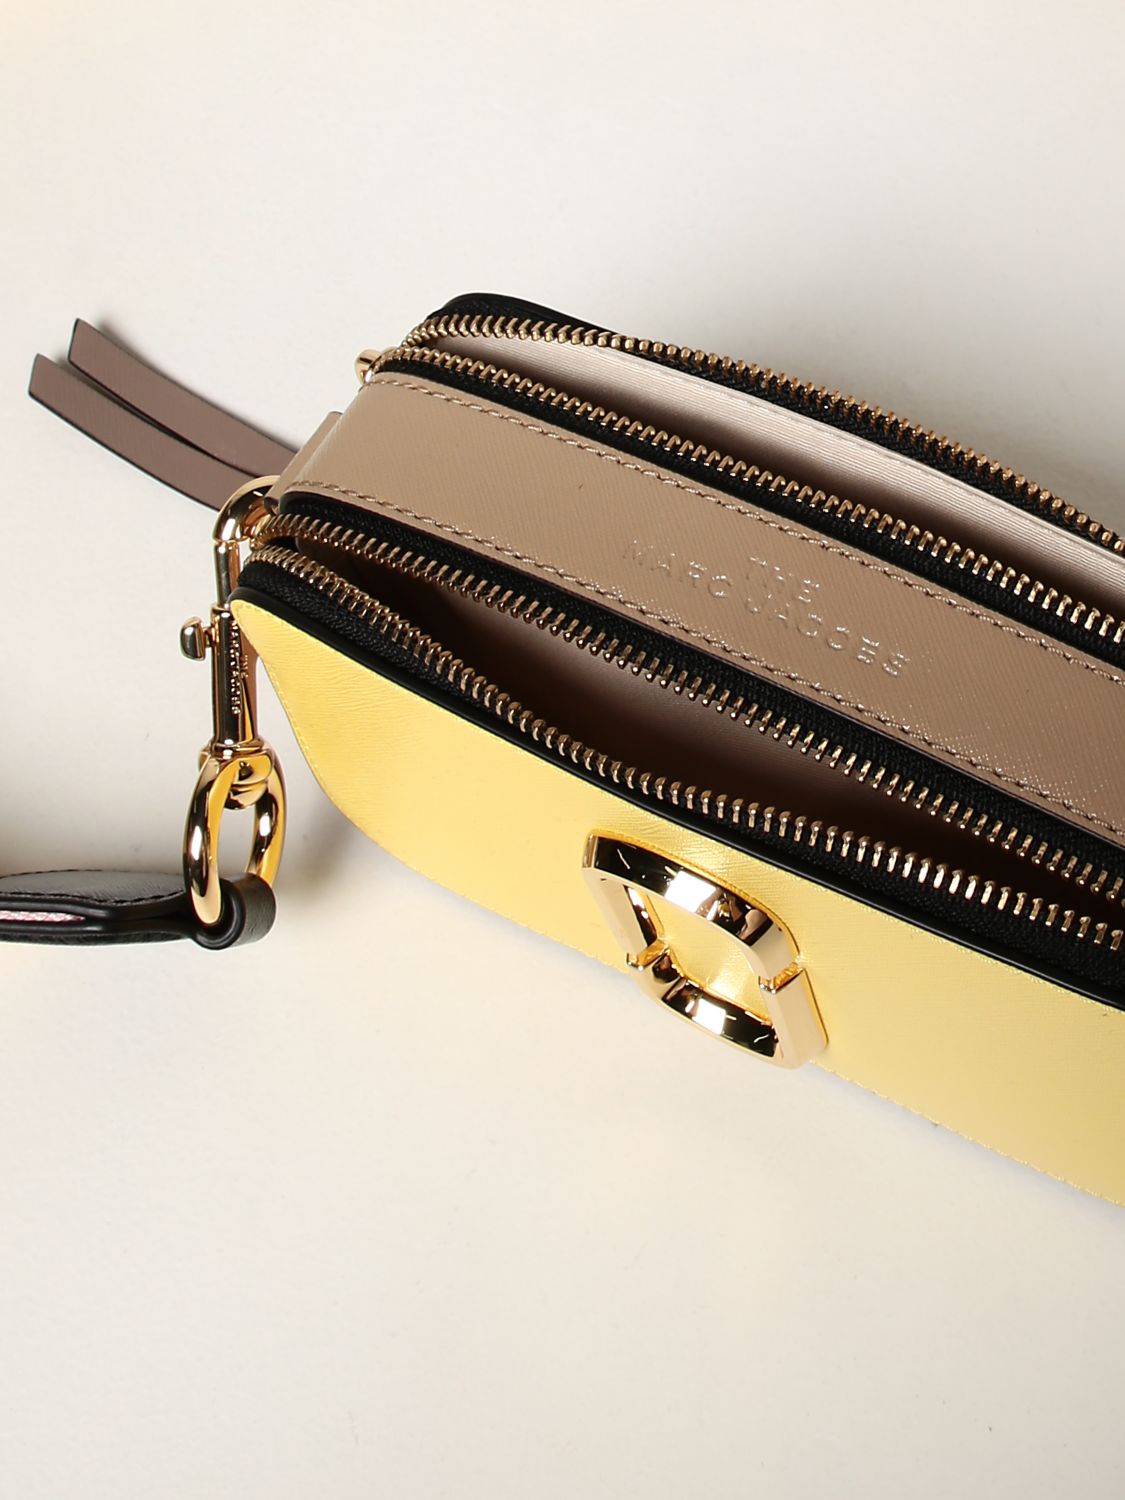 Snapshot leather crossbody bag Marc Jacobs Yellow in Leather